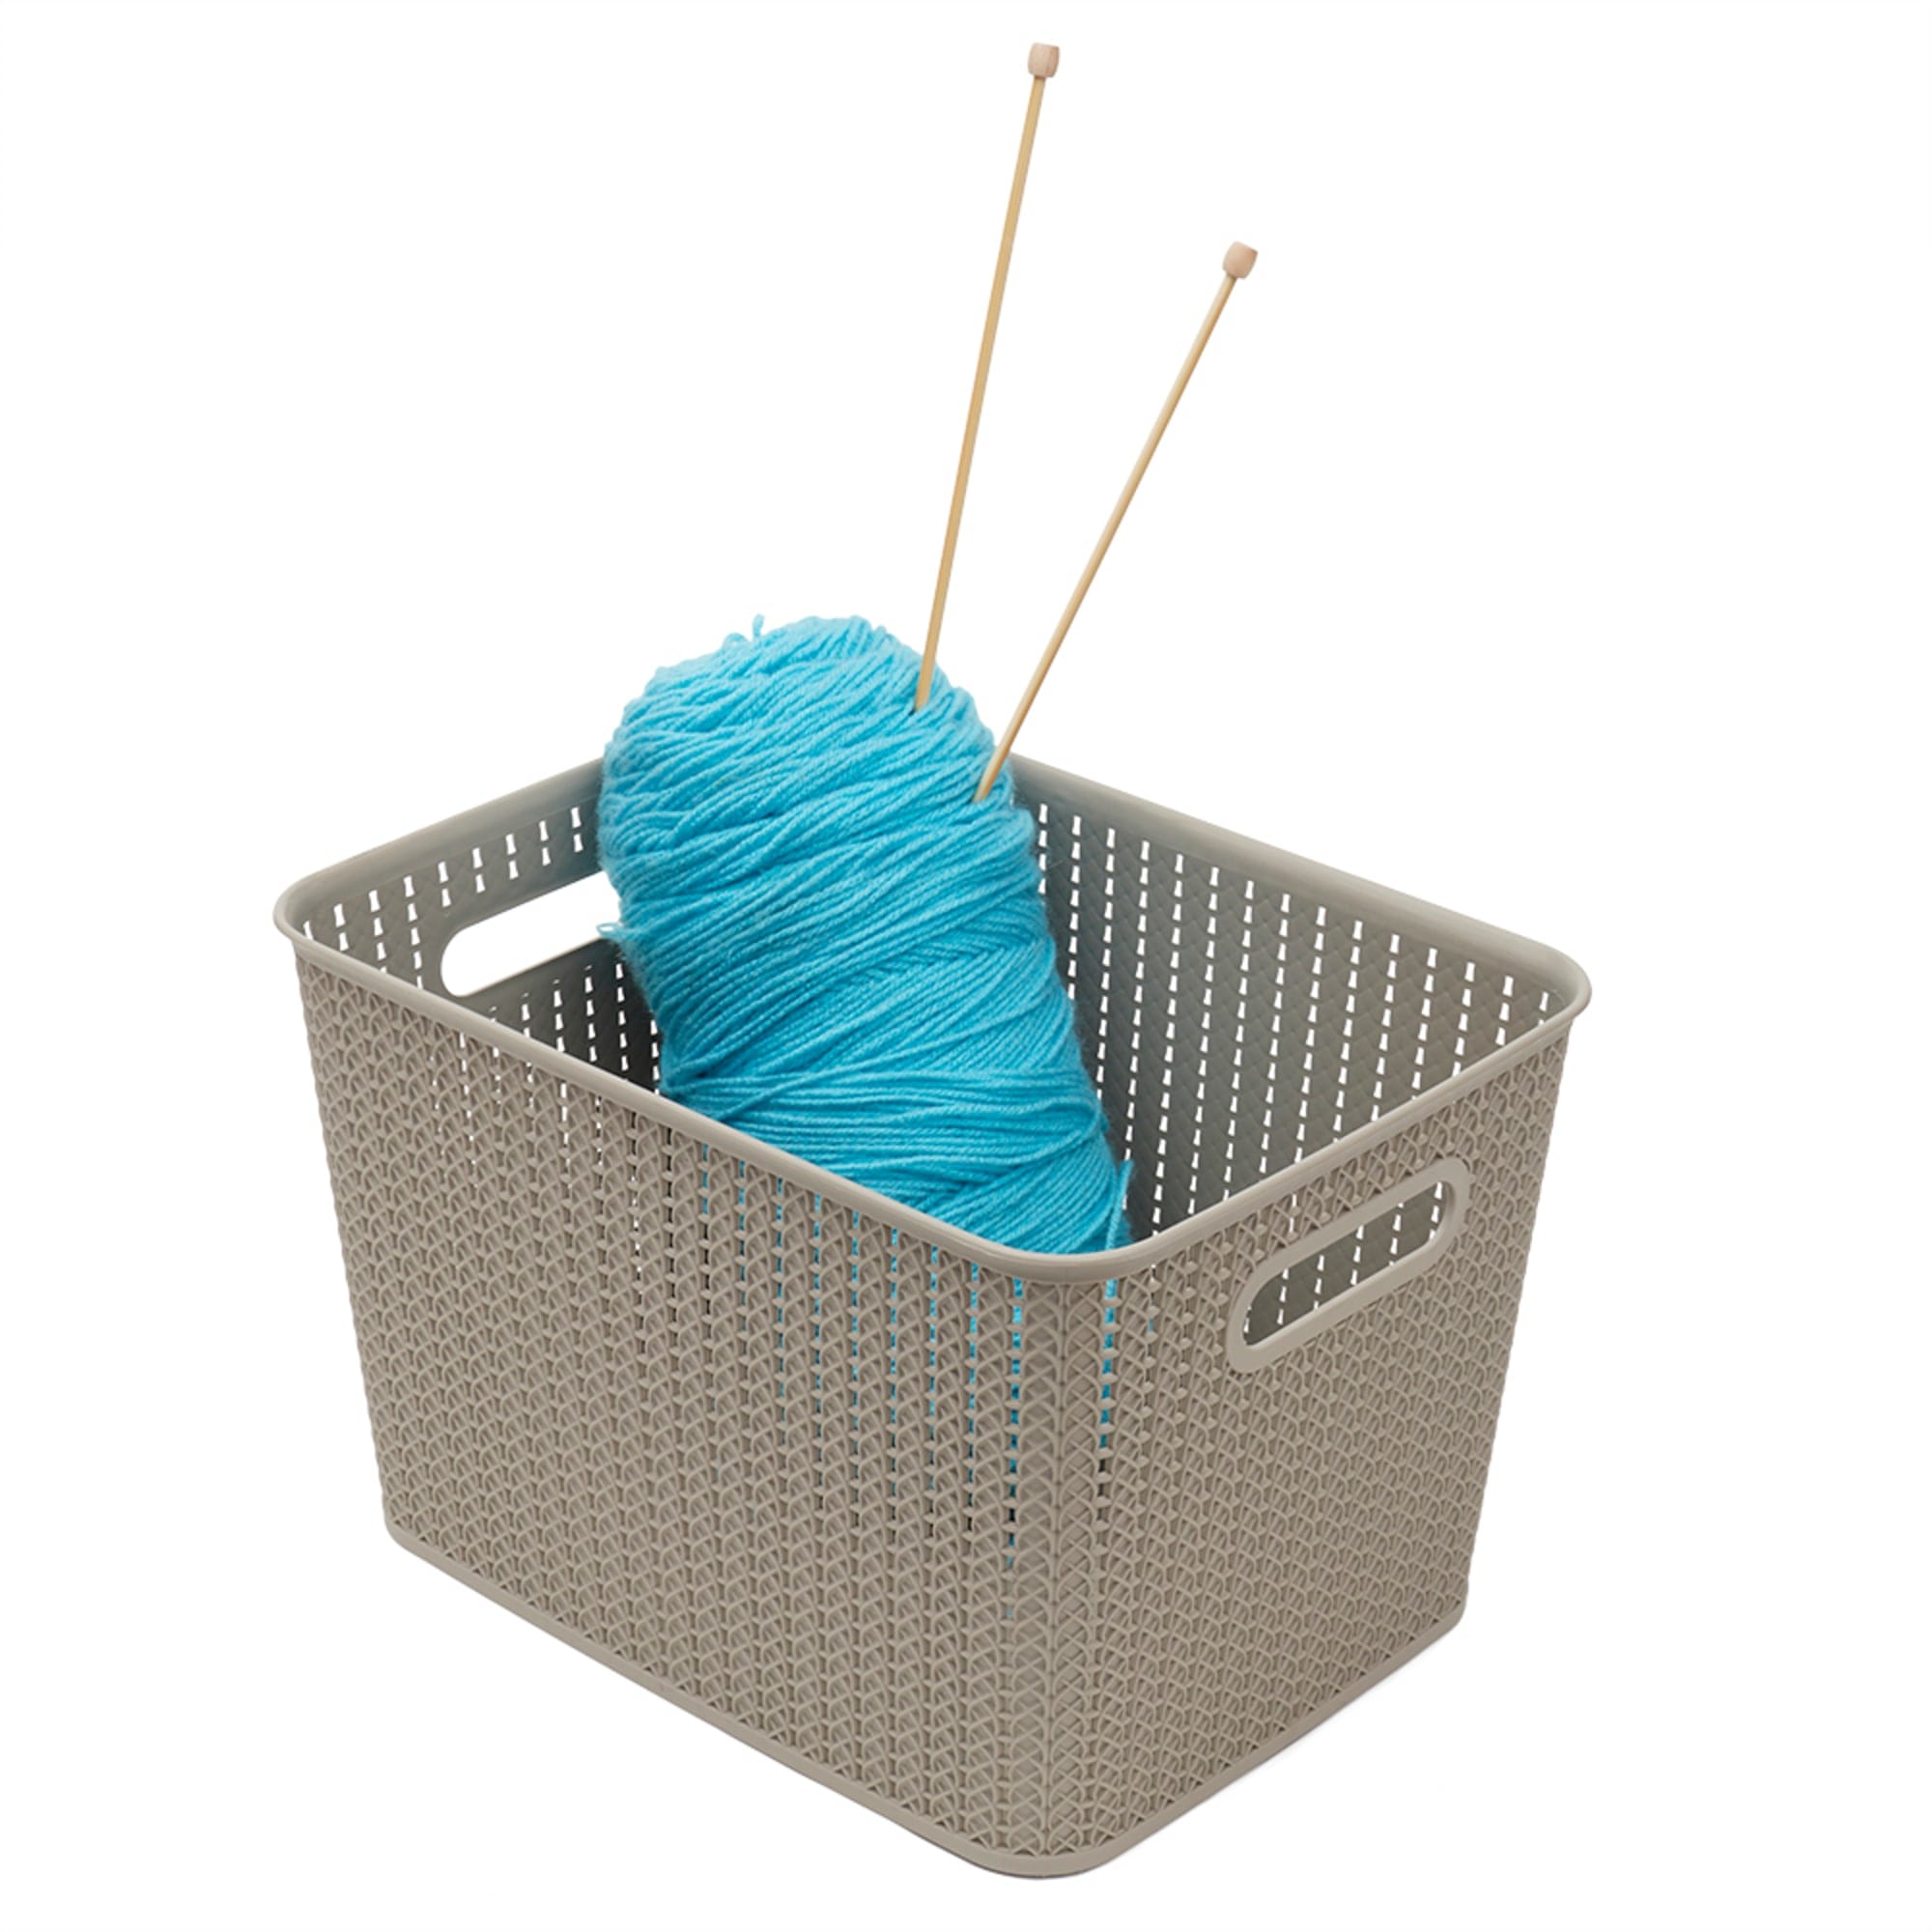 Home Basics 20 Liter Plastic Basket With Handles, Grey $6 EACH, CASE PACK OF 4